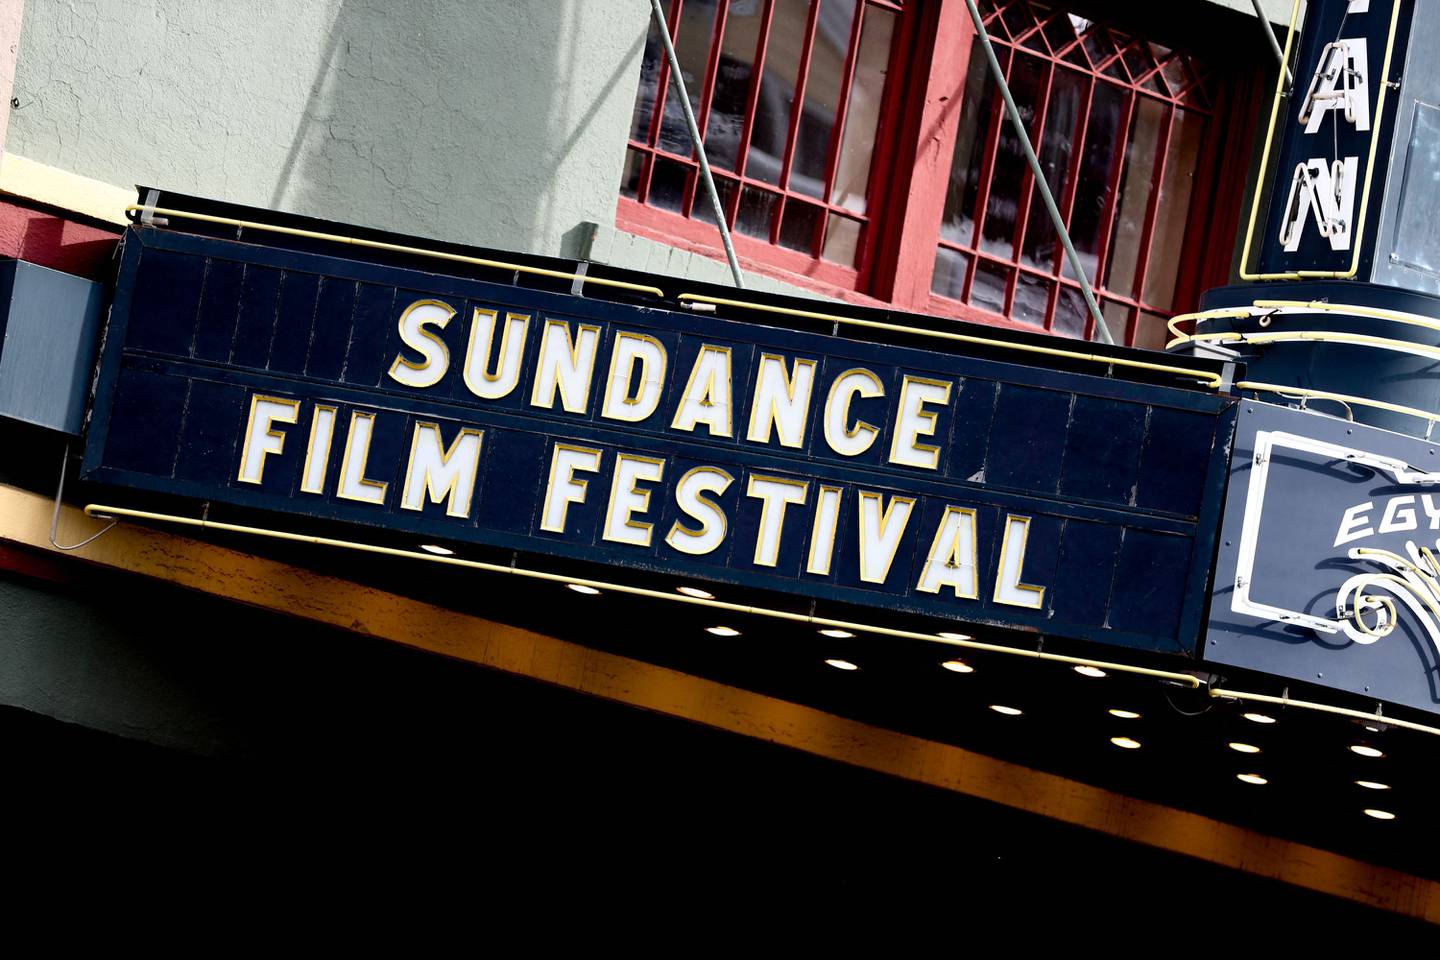 Sundance Film Festival cancelled all in-person events due to the rapid spread of the Omicron variant. AFP